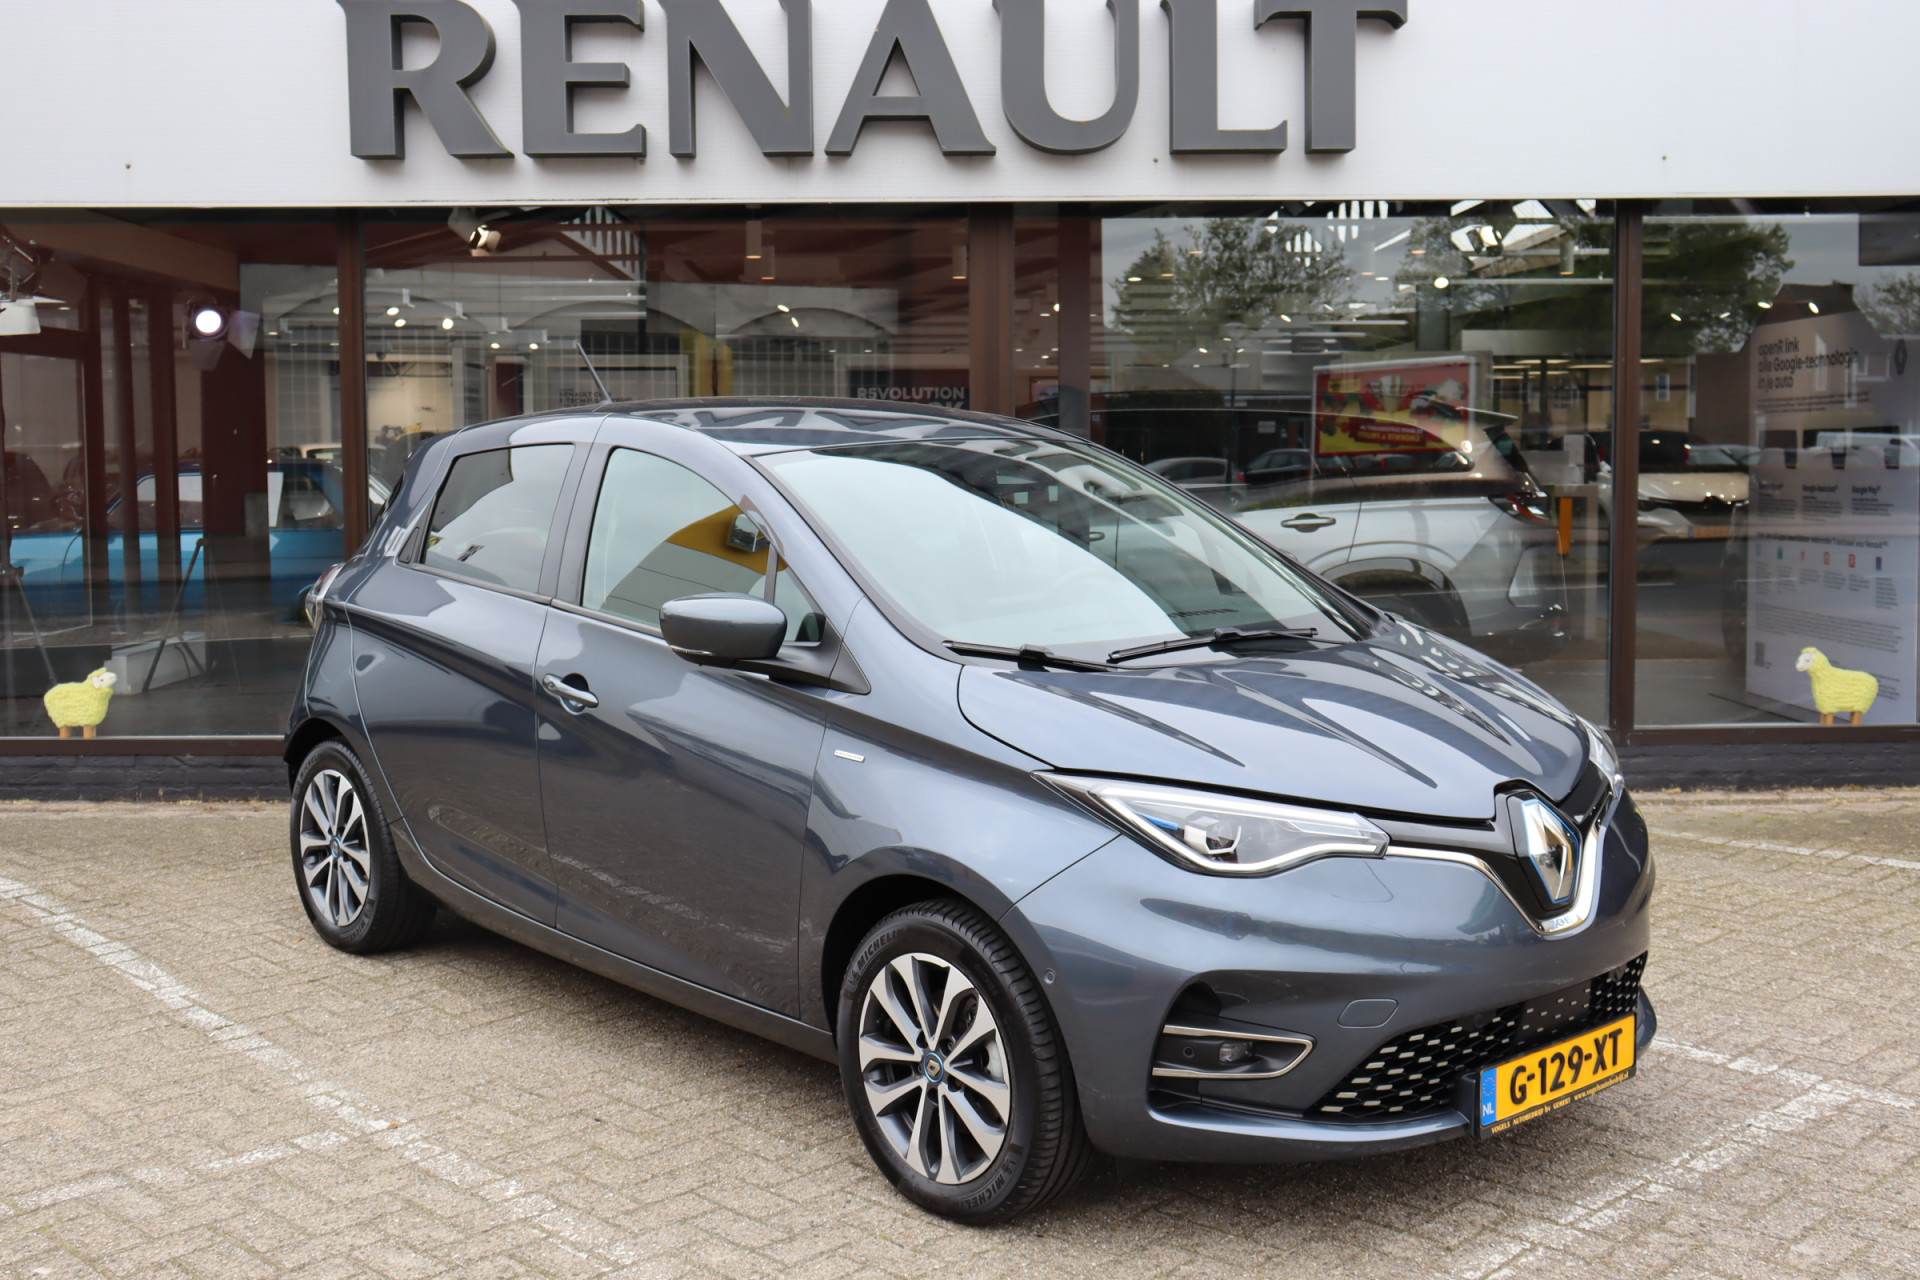 Renault ZOE R135 Edition One 52 kWh (Accuhuur)